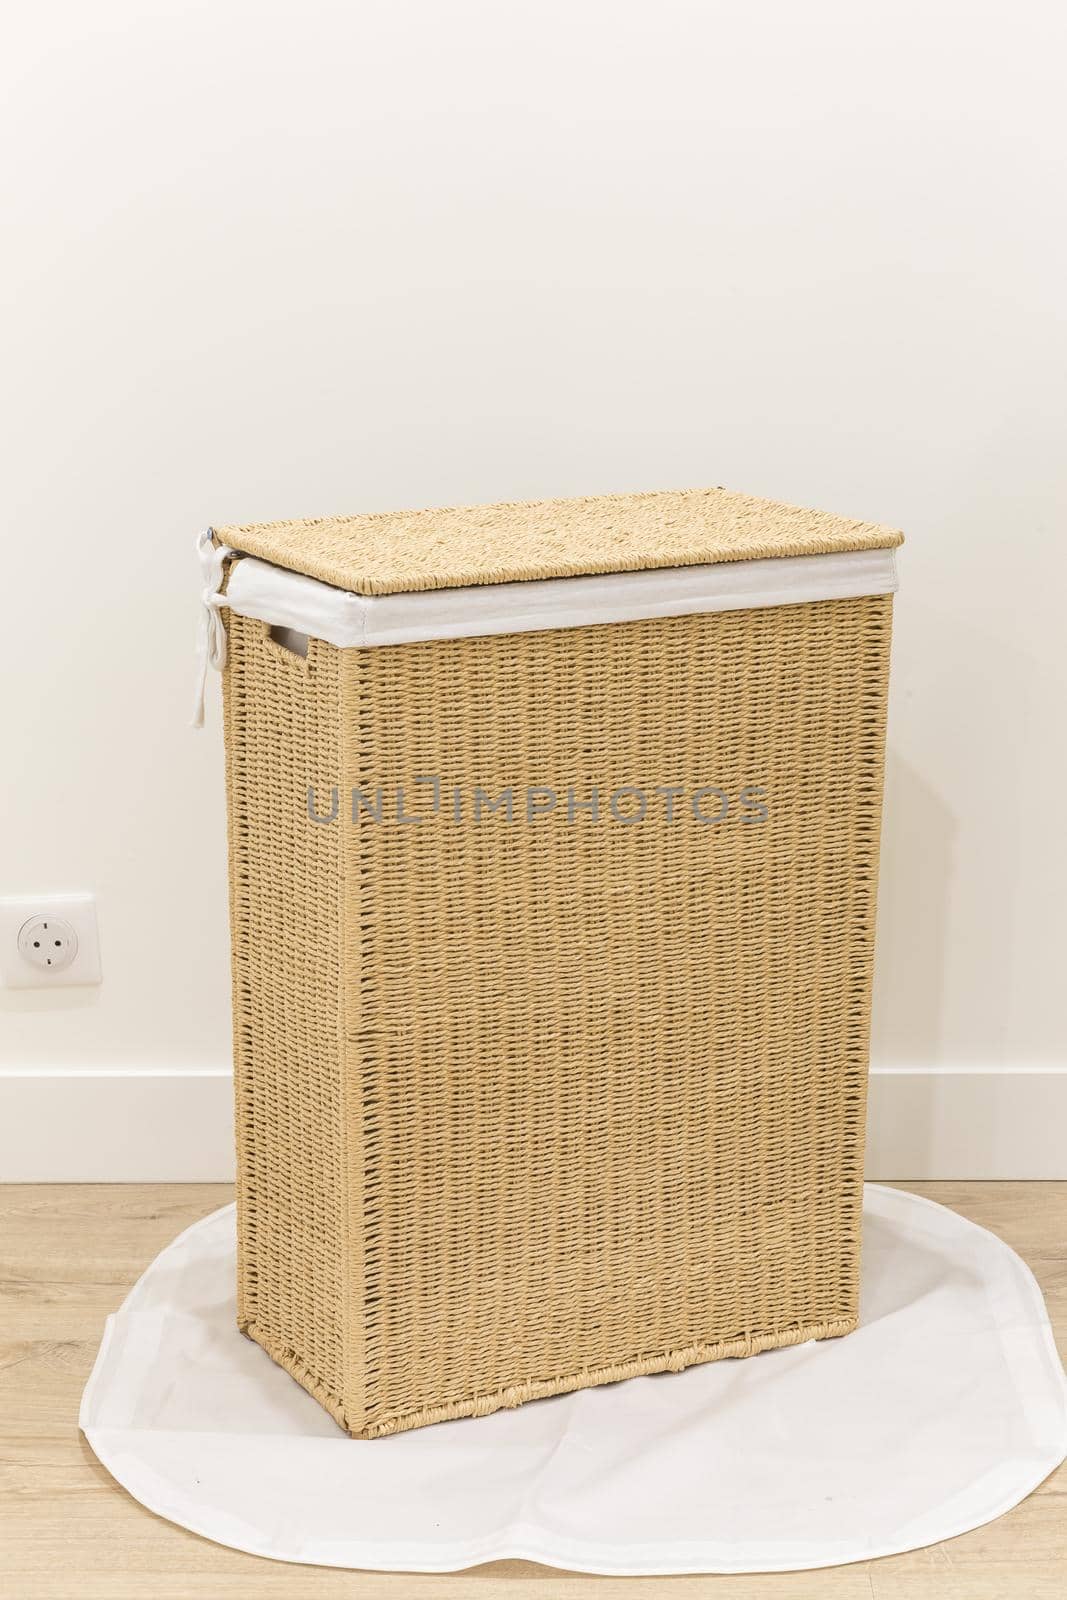 Isolated on white laundry basket made of rattan